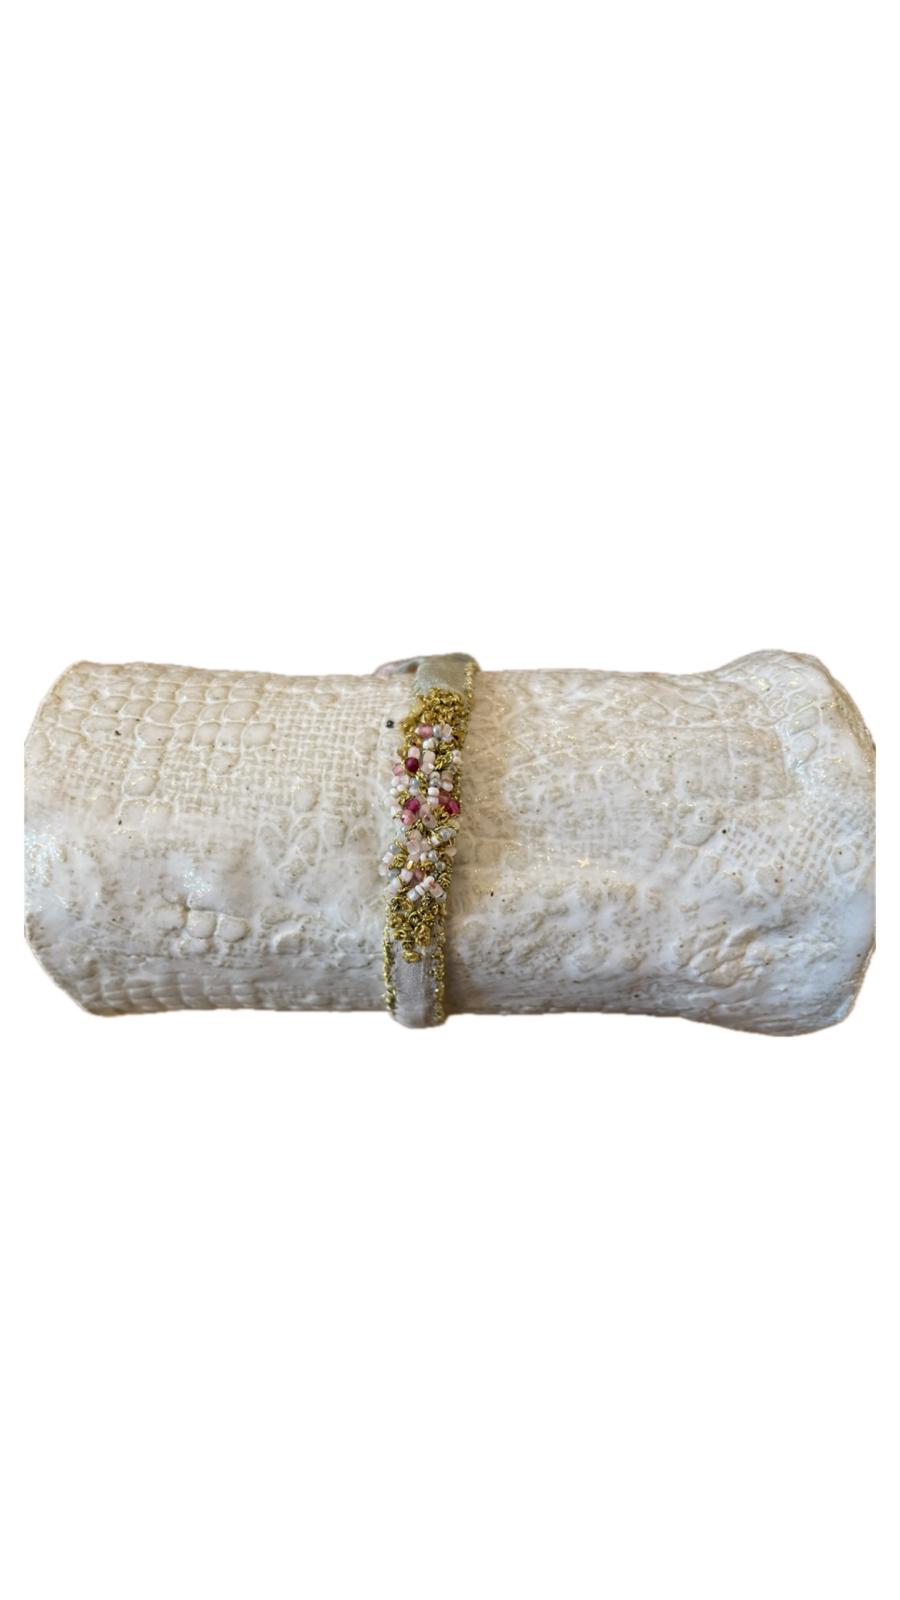 Antonia Rossi hand embroidered and beaded silk bracelet